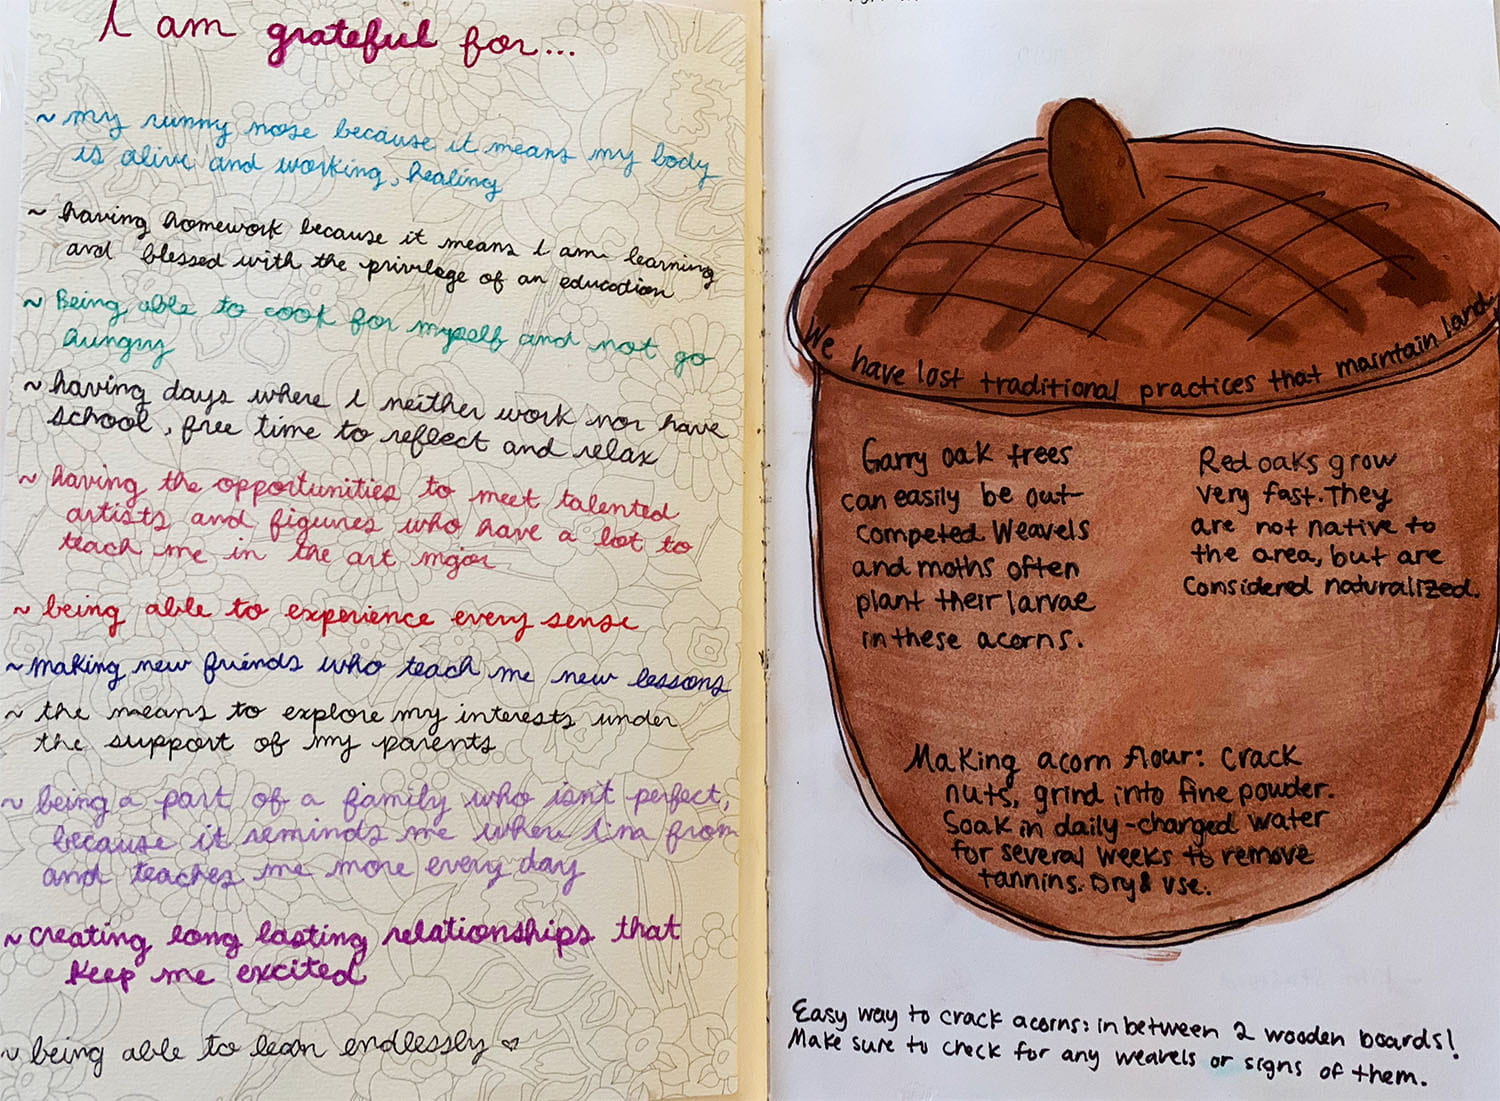 journal entry showing a colored pen drawing of an acorn with notes about how to eat them, and a list titled "I am grateful for..."